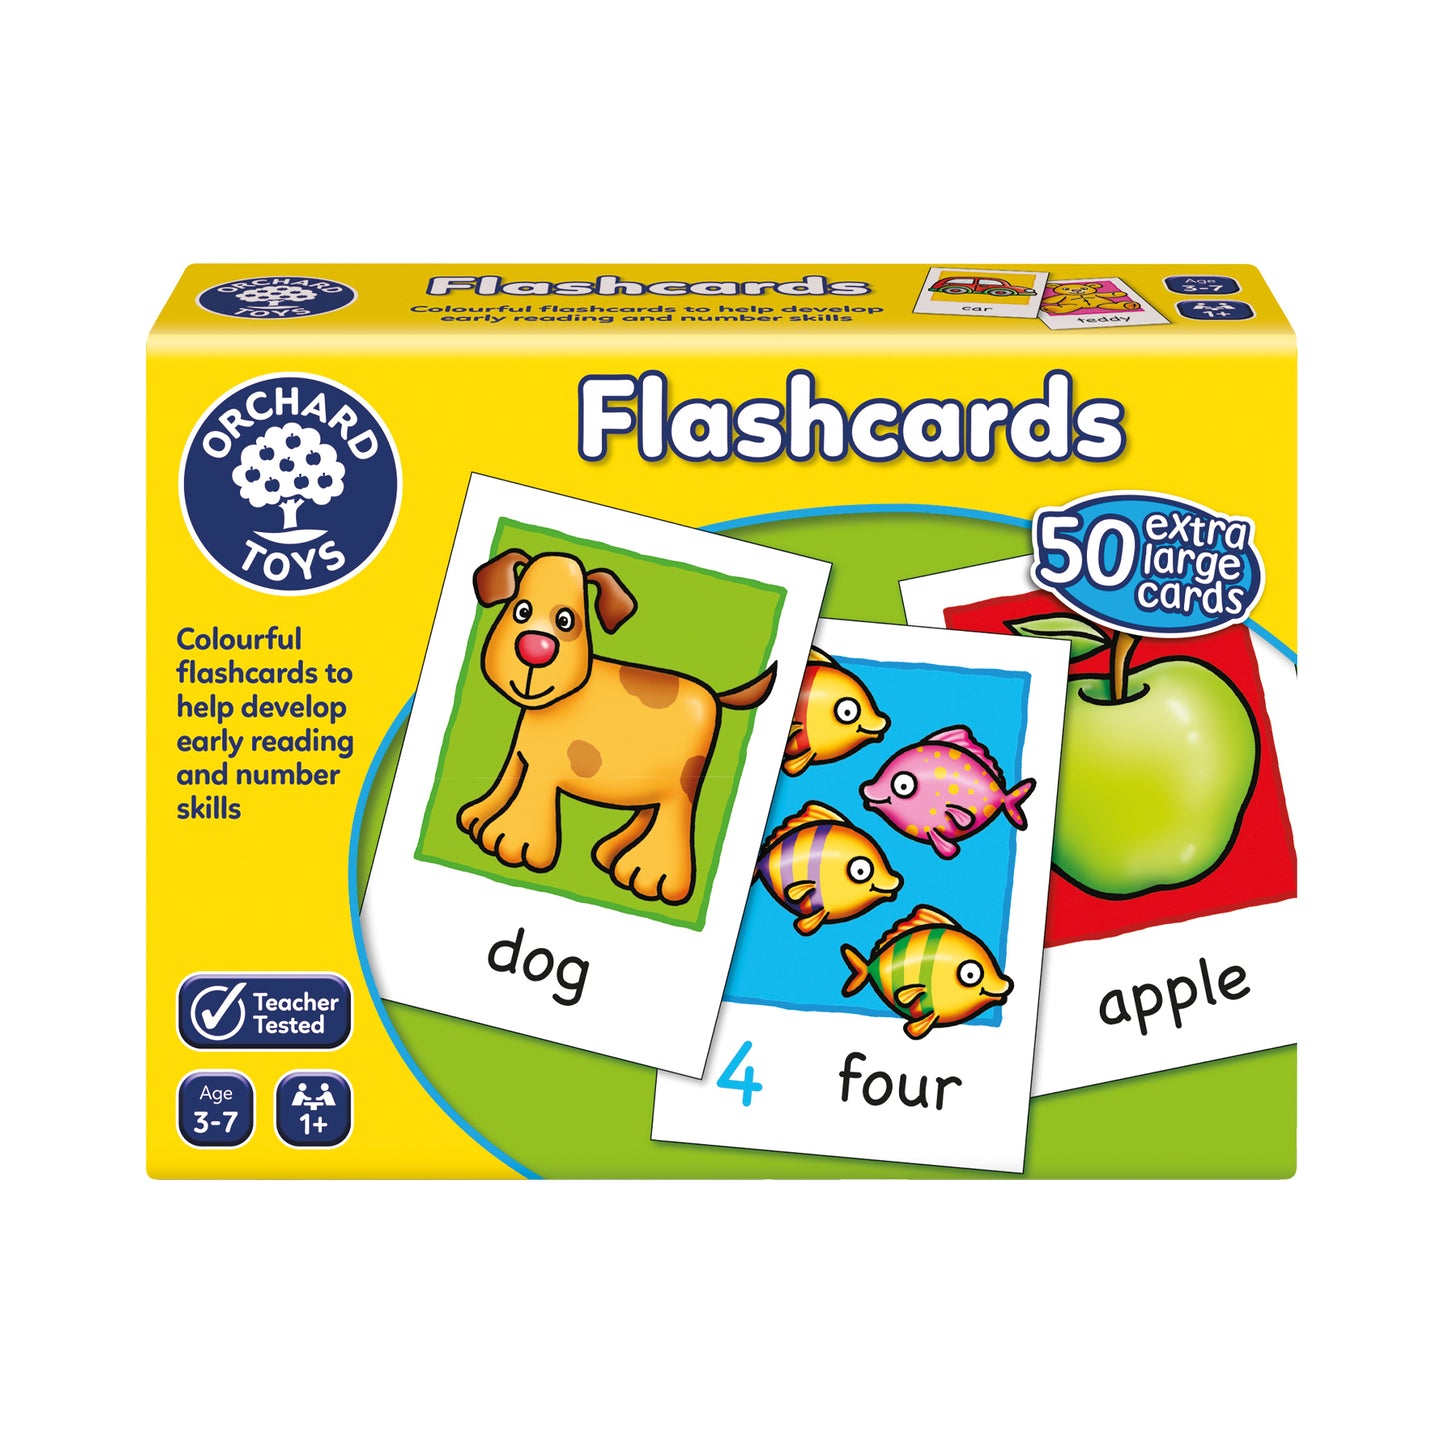 Orchard Toys Flashcards 50 Cards 圖像認字卡 50 張